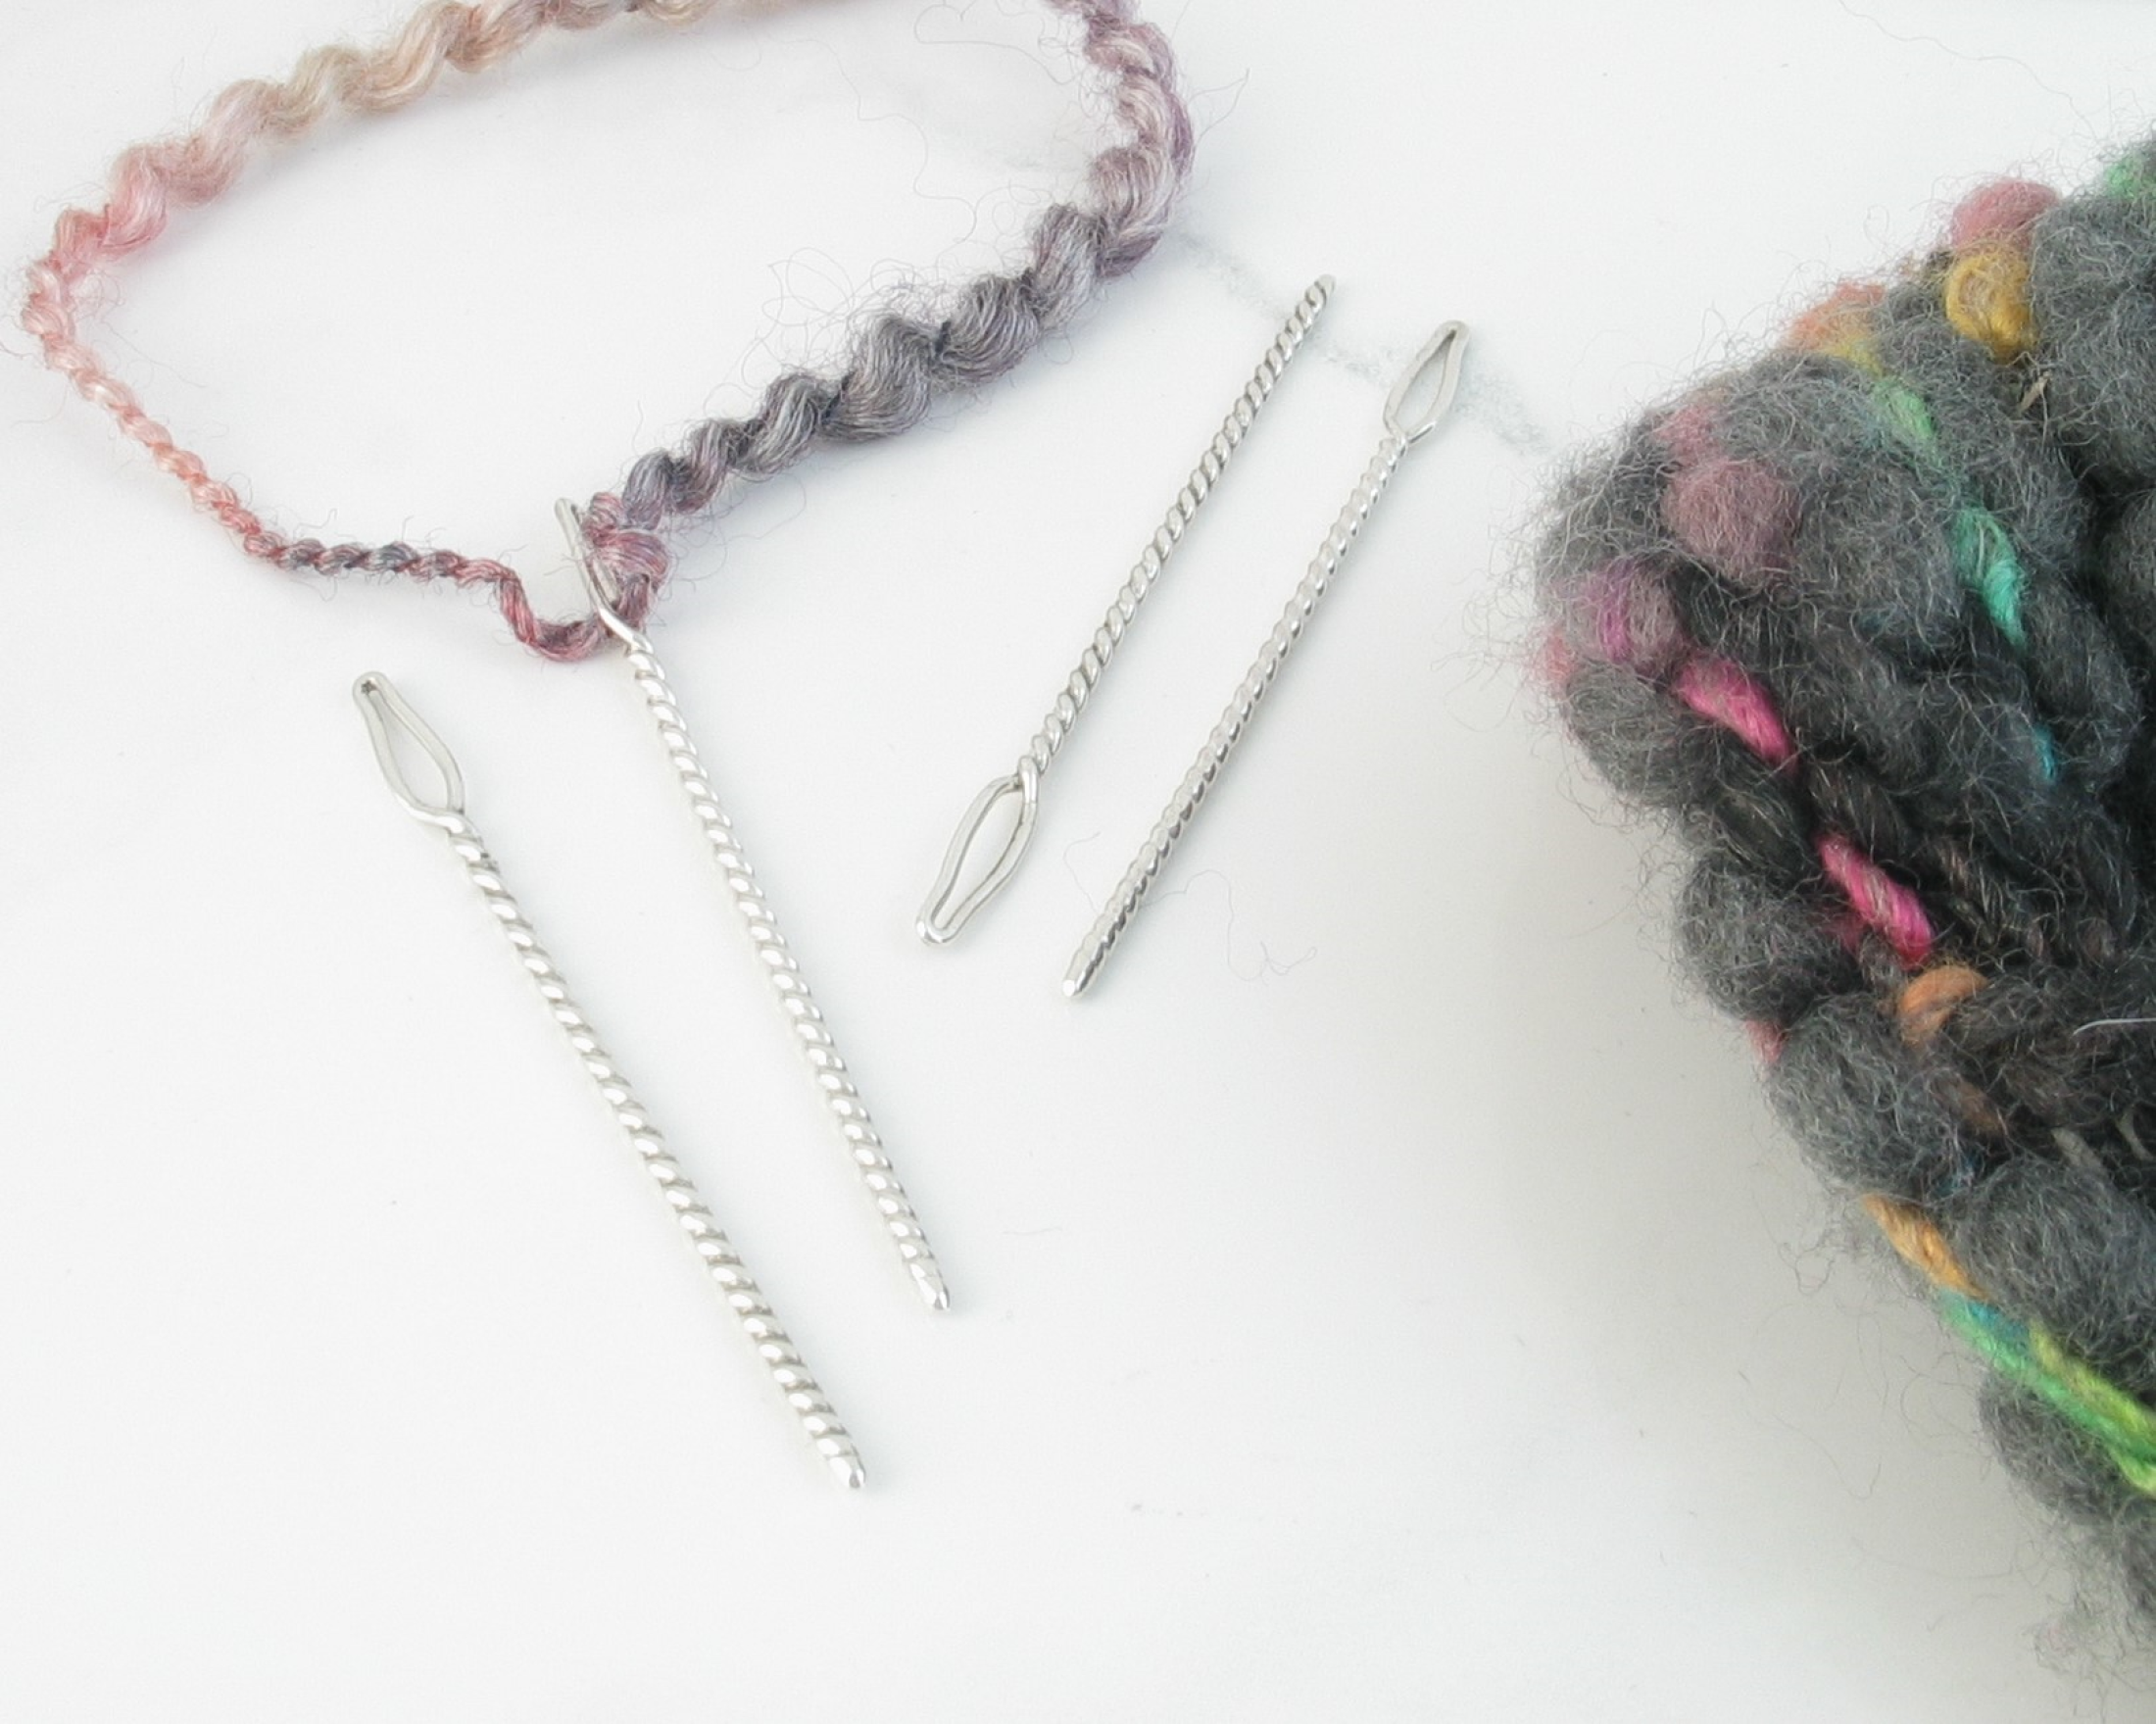 Tools of the Trade: Darning Needles - Knitter's Review